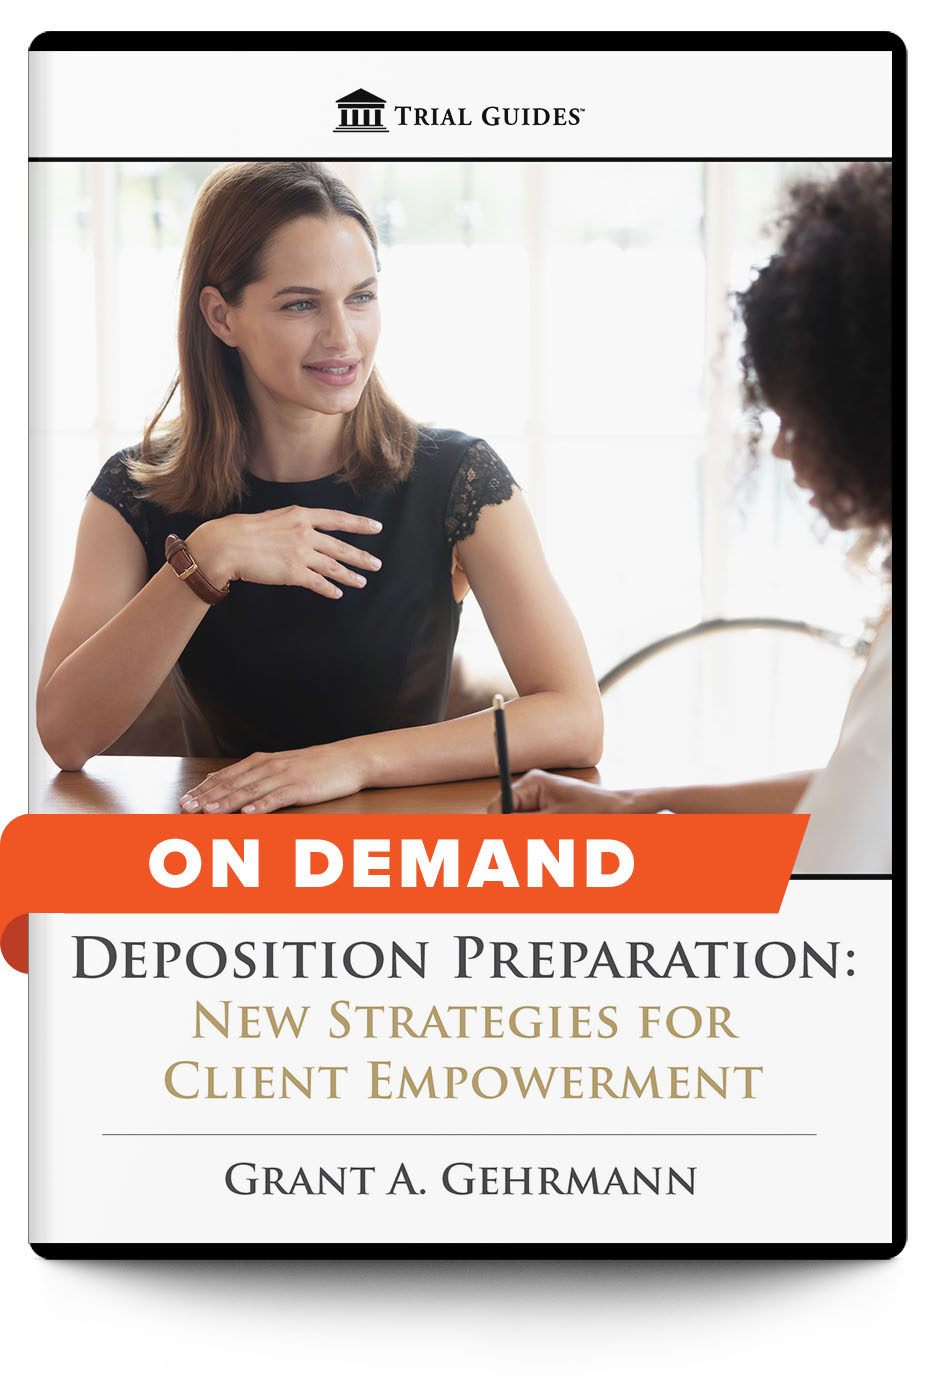 Deposition Preparation New Strategies for Client Empowerment